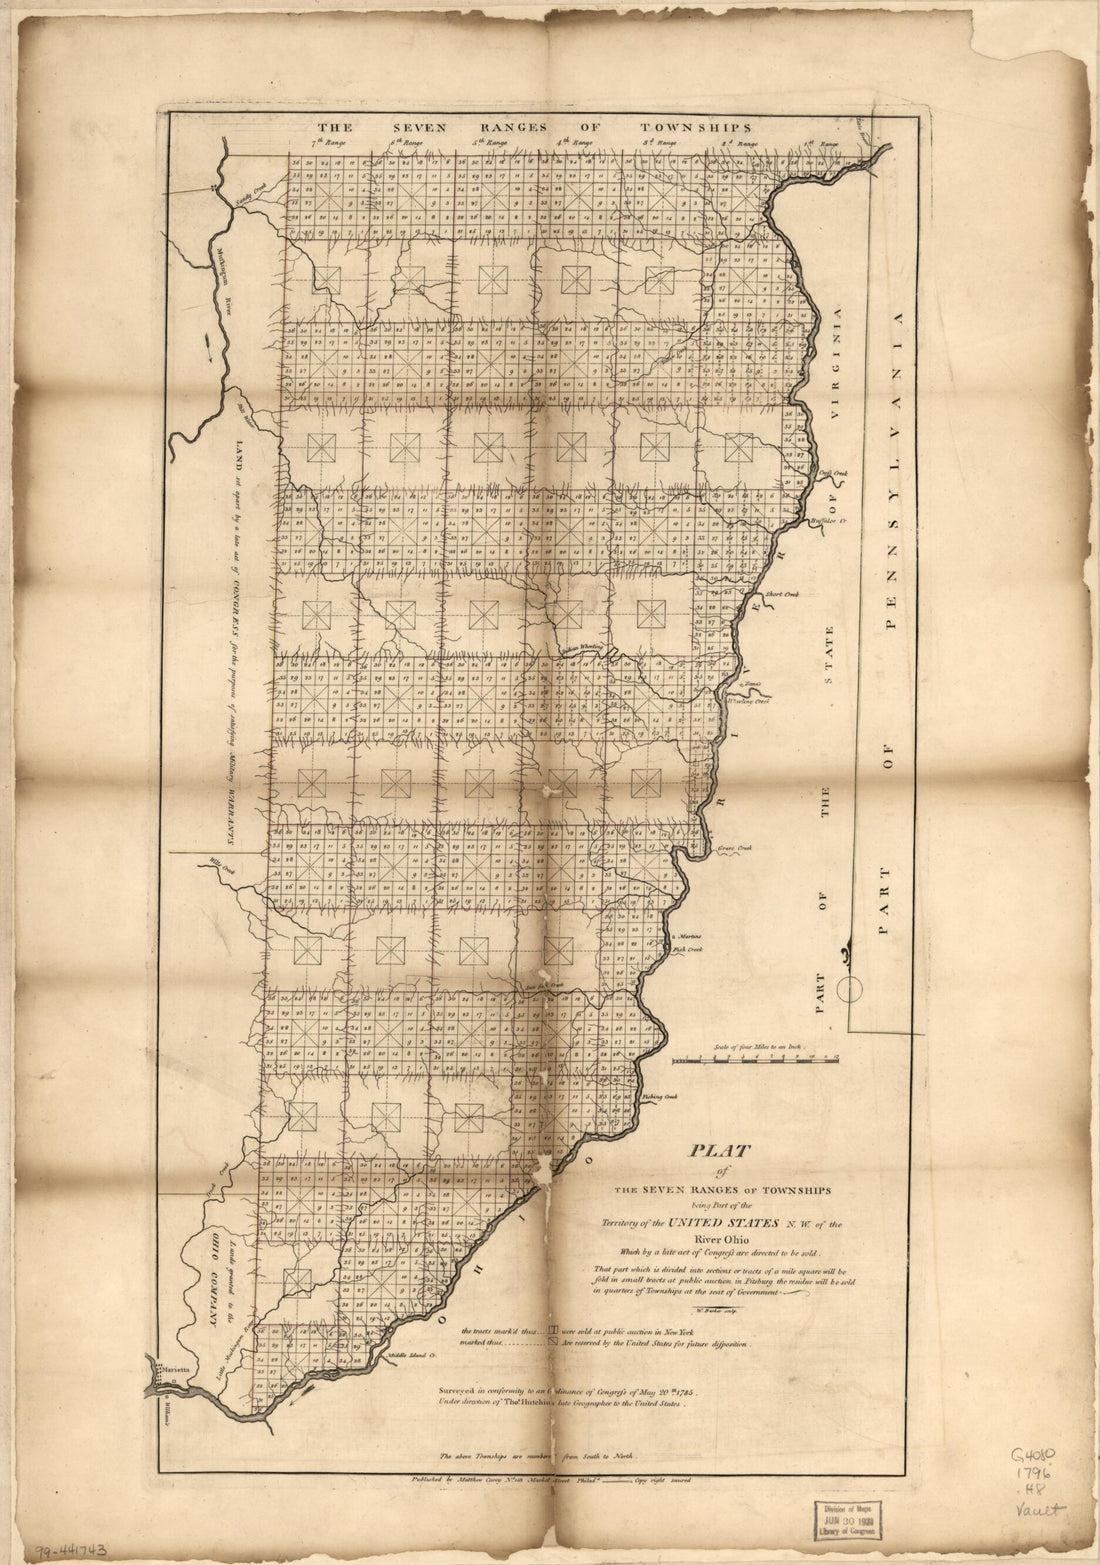 This old map of Plat of the Seven Ranges of Townships Being Part of the Territory of the United States, N.W. of the River Ohio from 1796 was created by W. (William) Barker, Mathew Carey, Thomas Hutchins in 1796